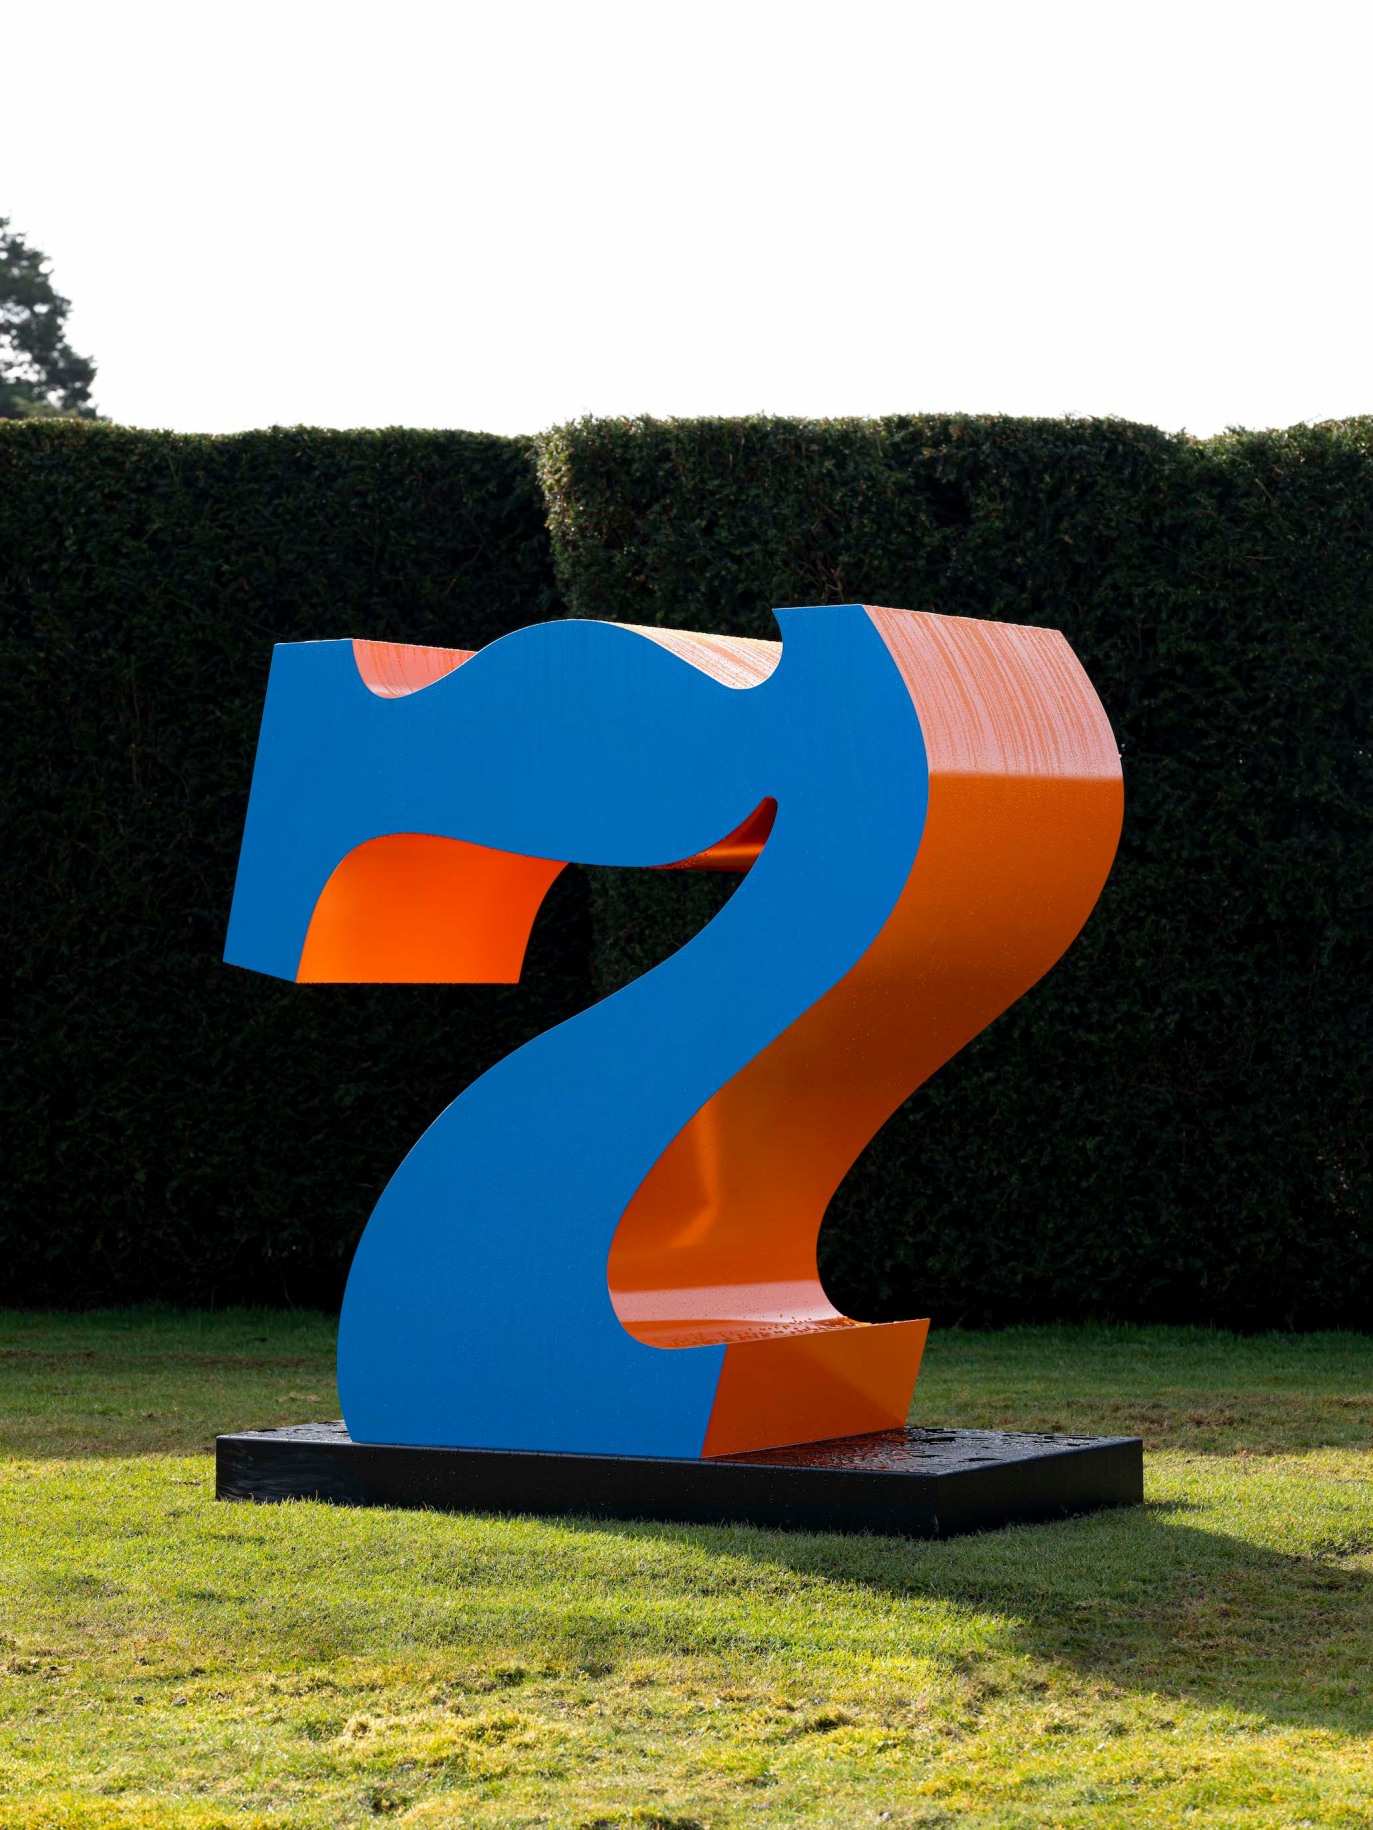 Installation view of Indiana's blue and orange polychrome aluminum sculpture SEVEN at Yorkshire Sculpture Park